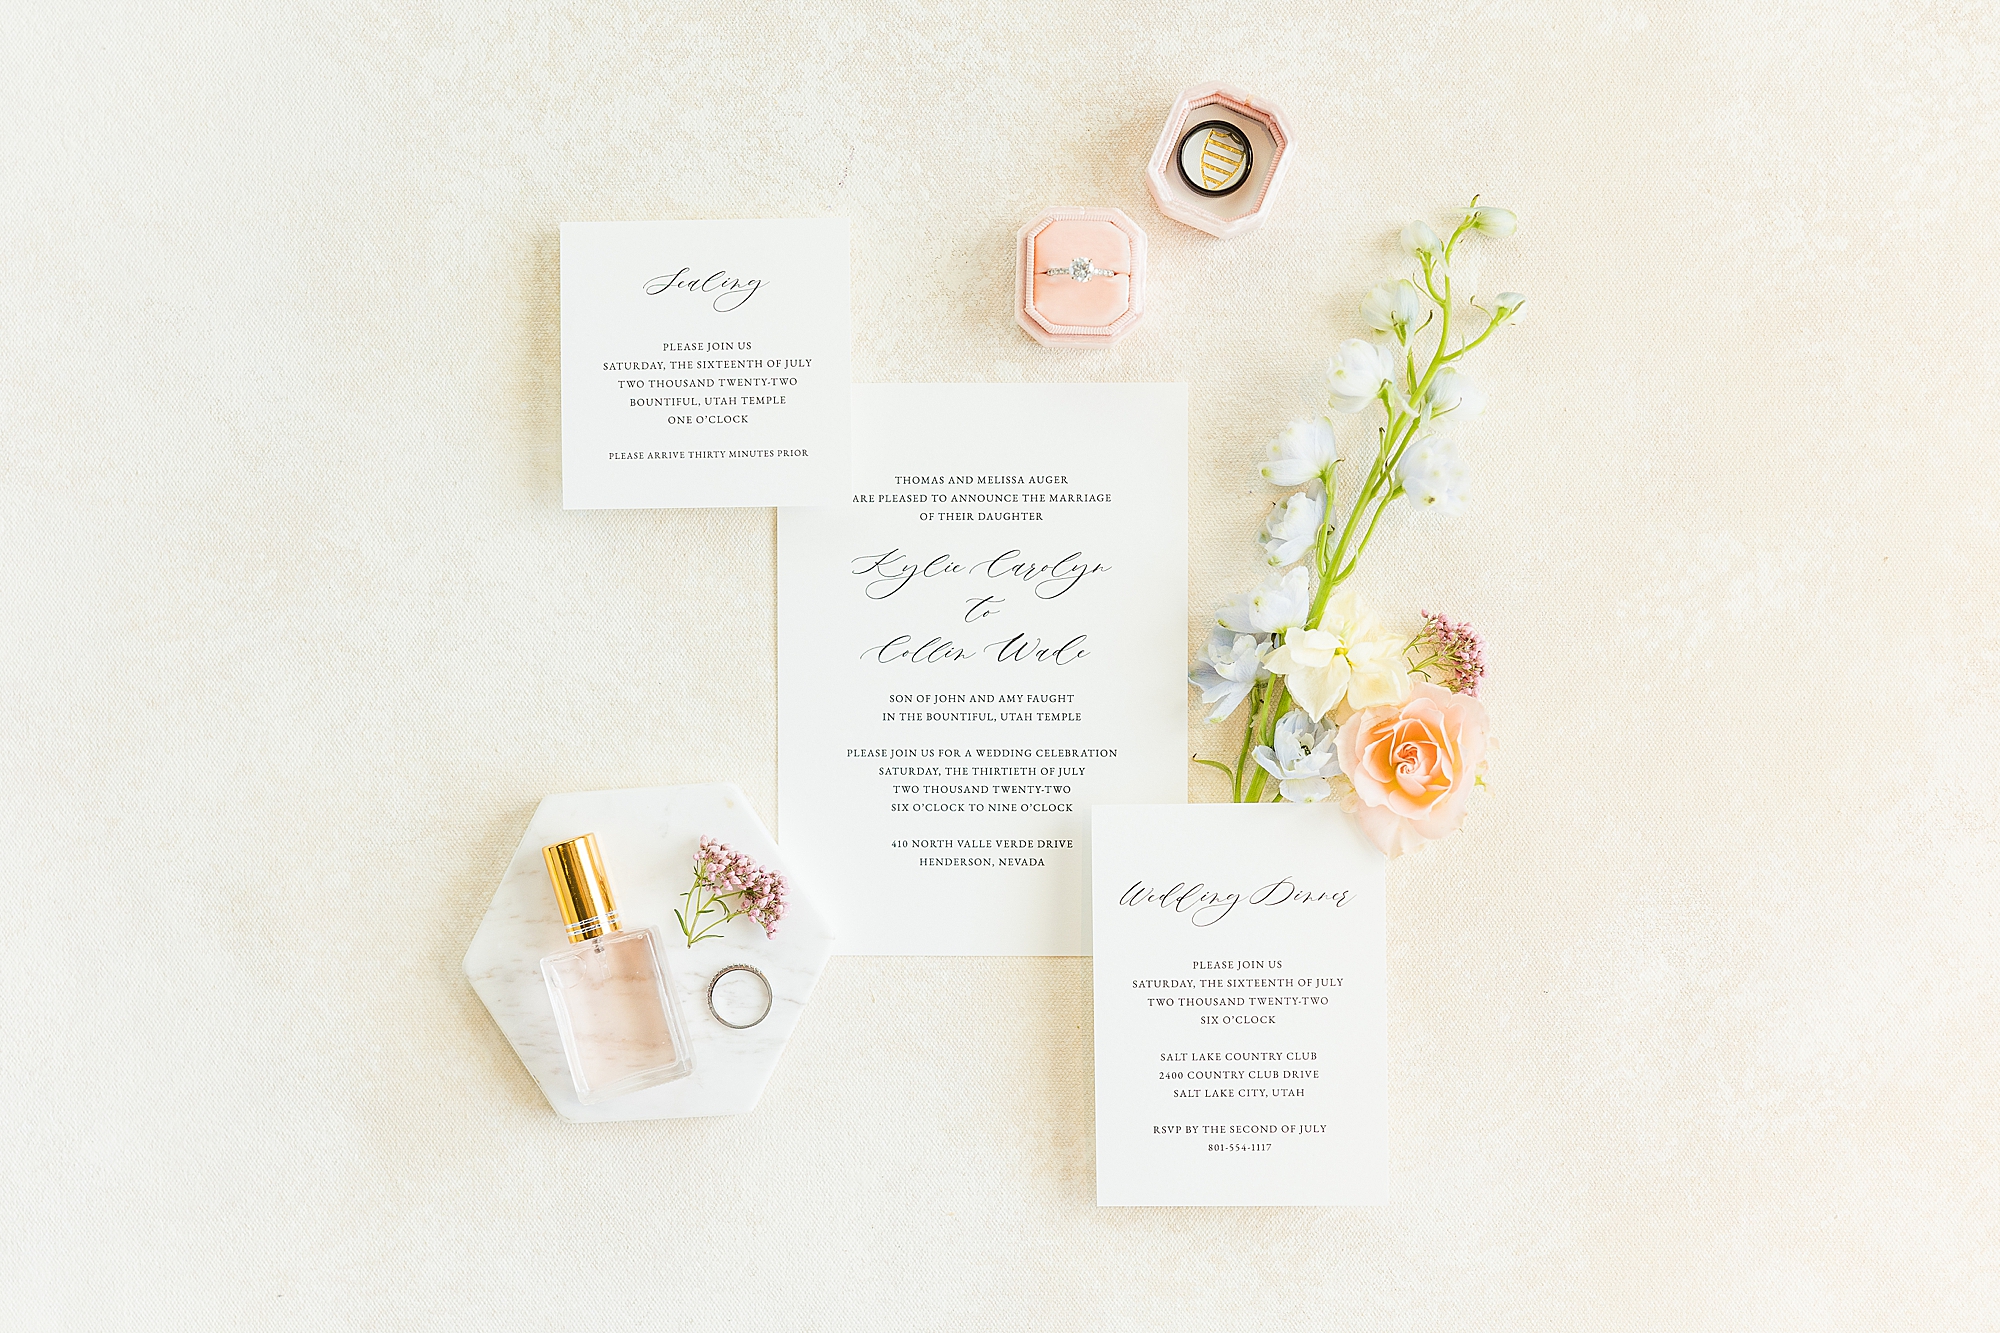 A stunning shot of the couple's wedding invitation suite, reflecting the elegant theme of the celebration.
